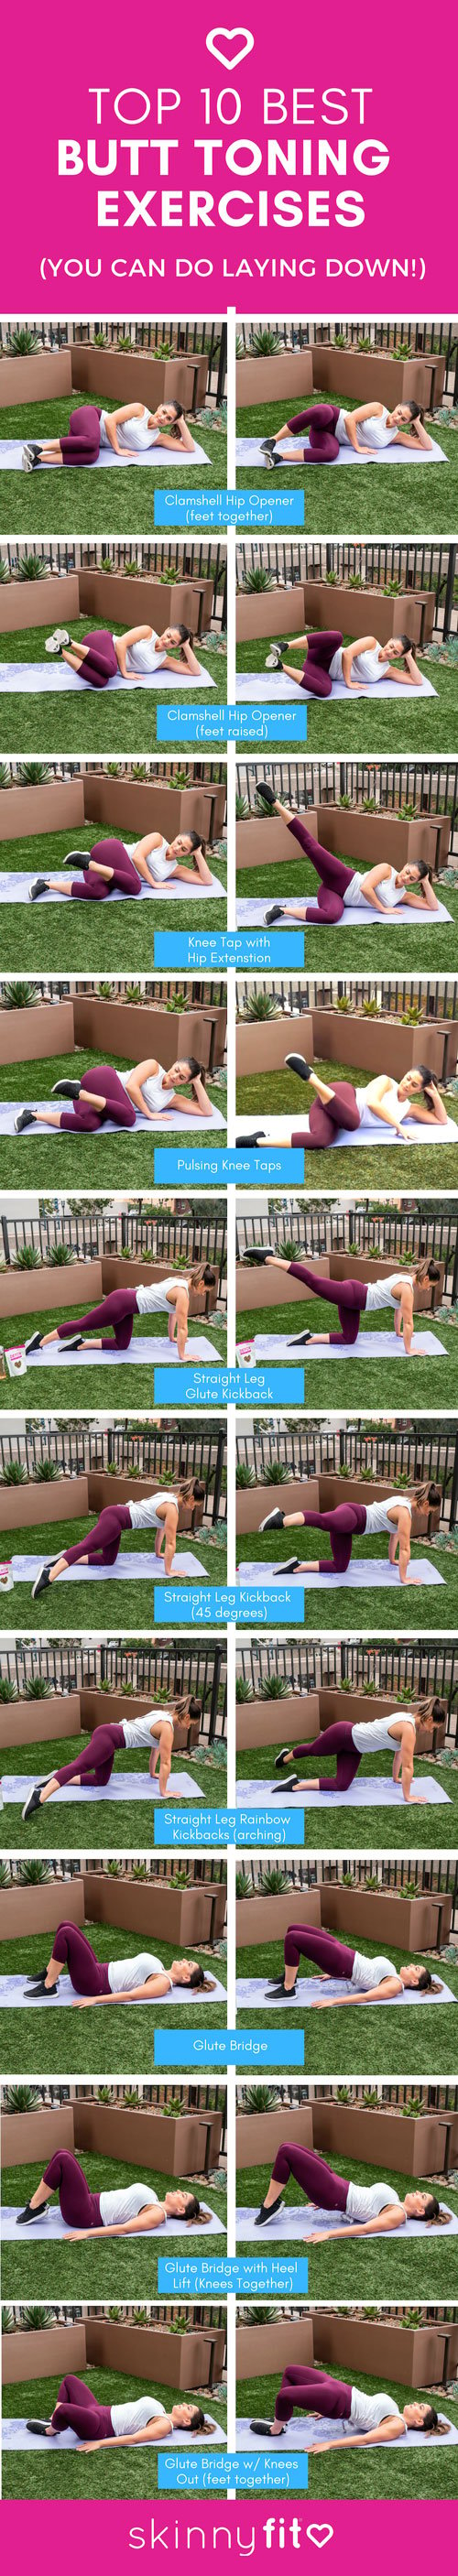 butt toning exercises